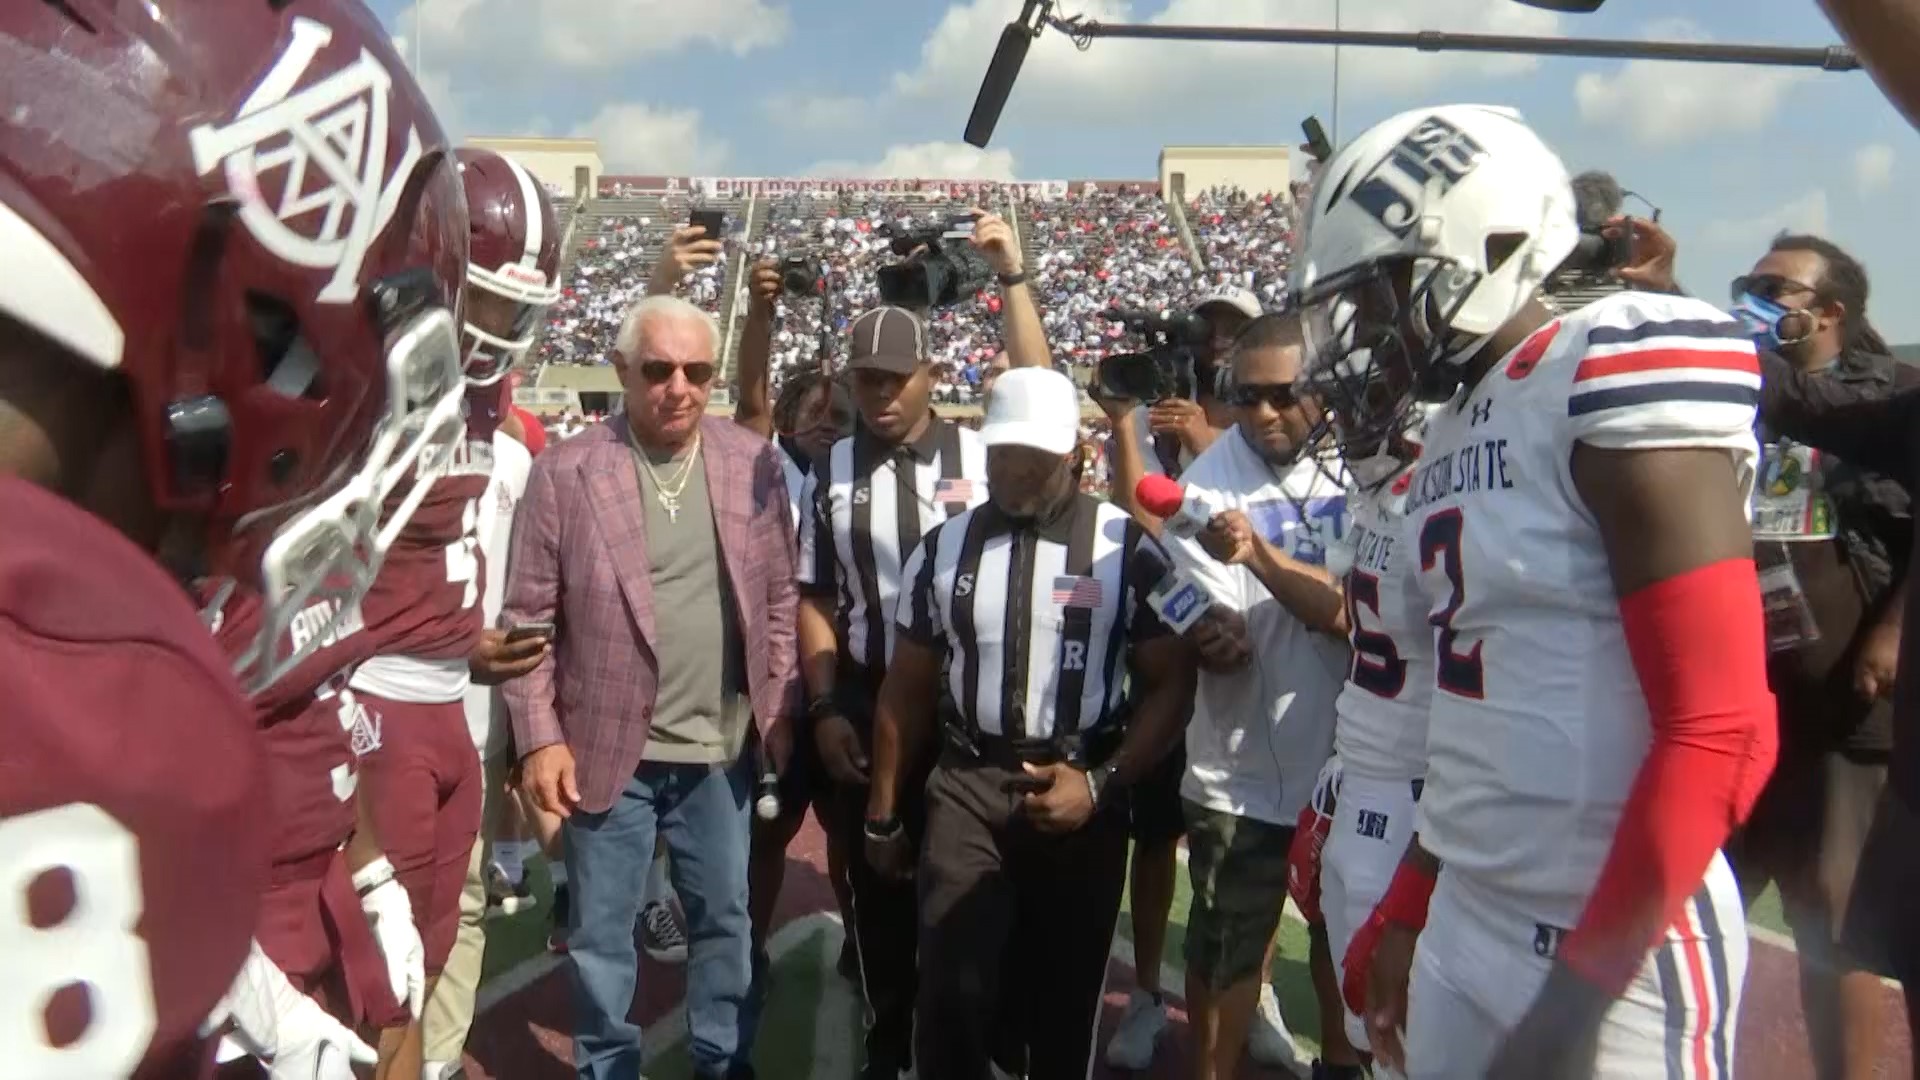 Shedeur Sanders passed for 249 yards and four touchdowns, as Jackson State romped Alabama A&M, 62-15.